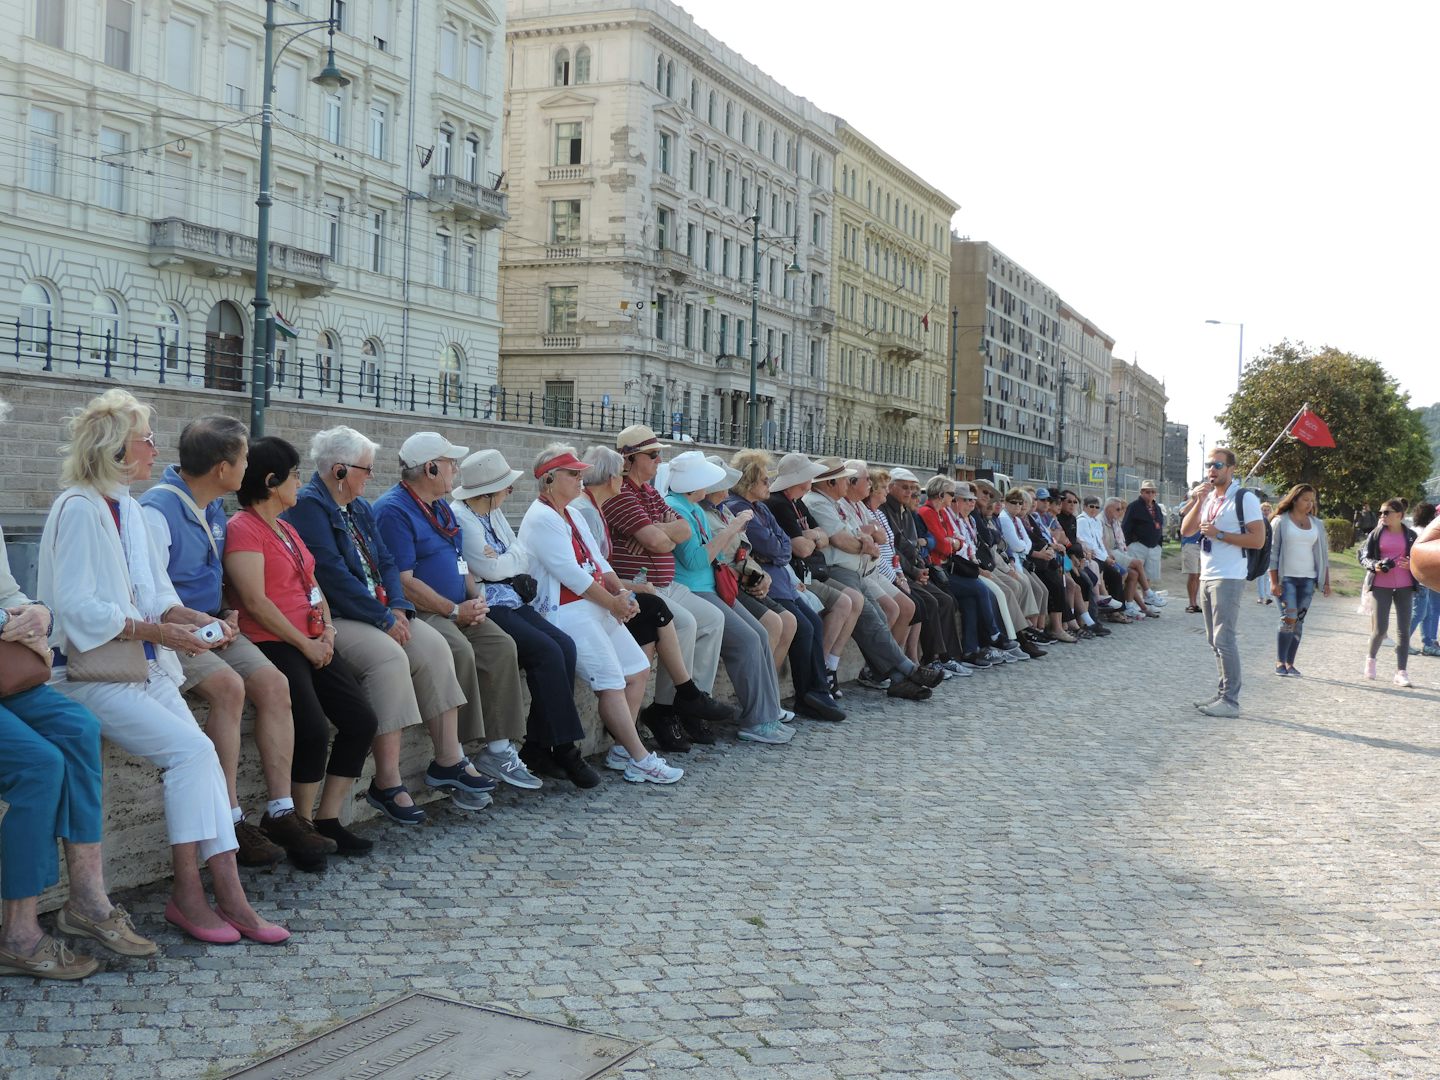 Learning about the "Shoes on the Danube" memorial in Budapest.